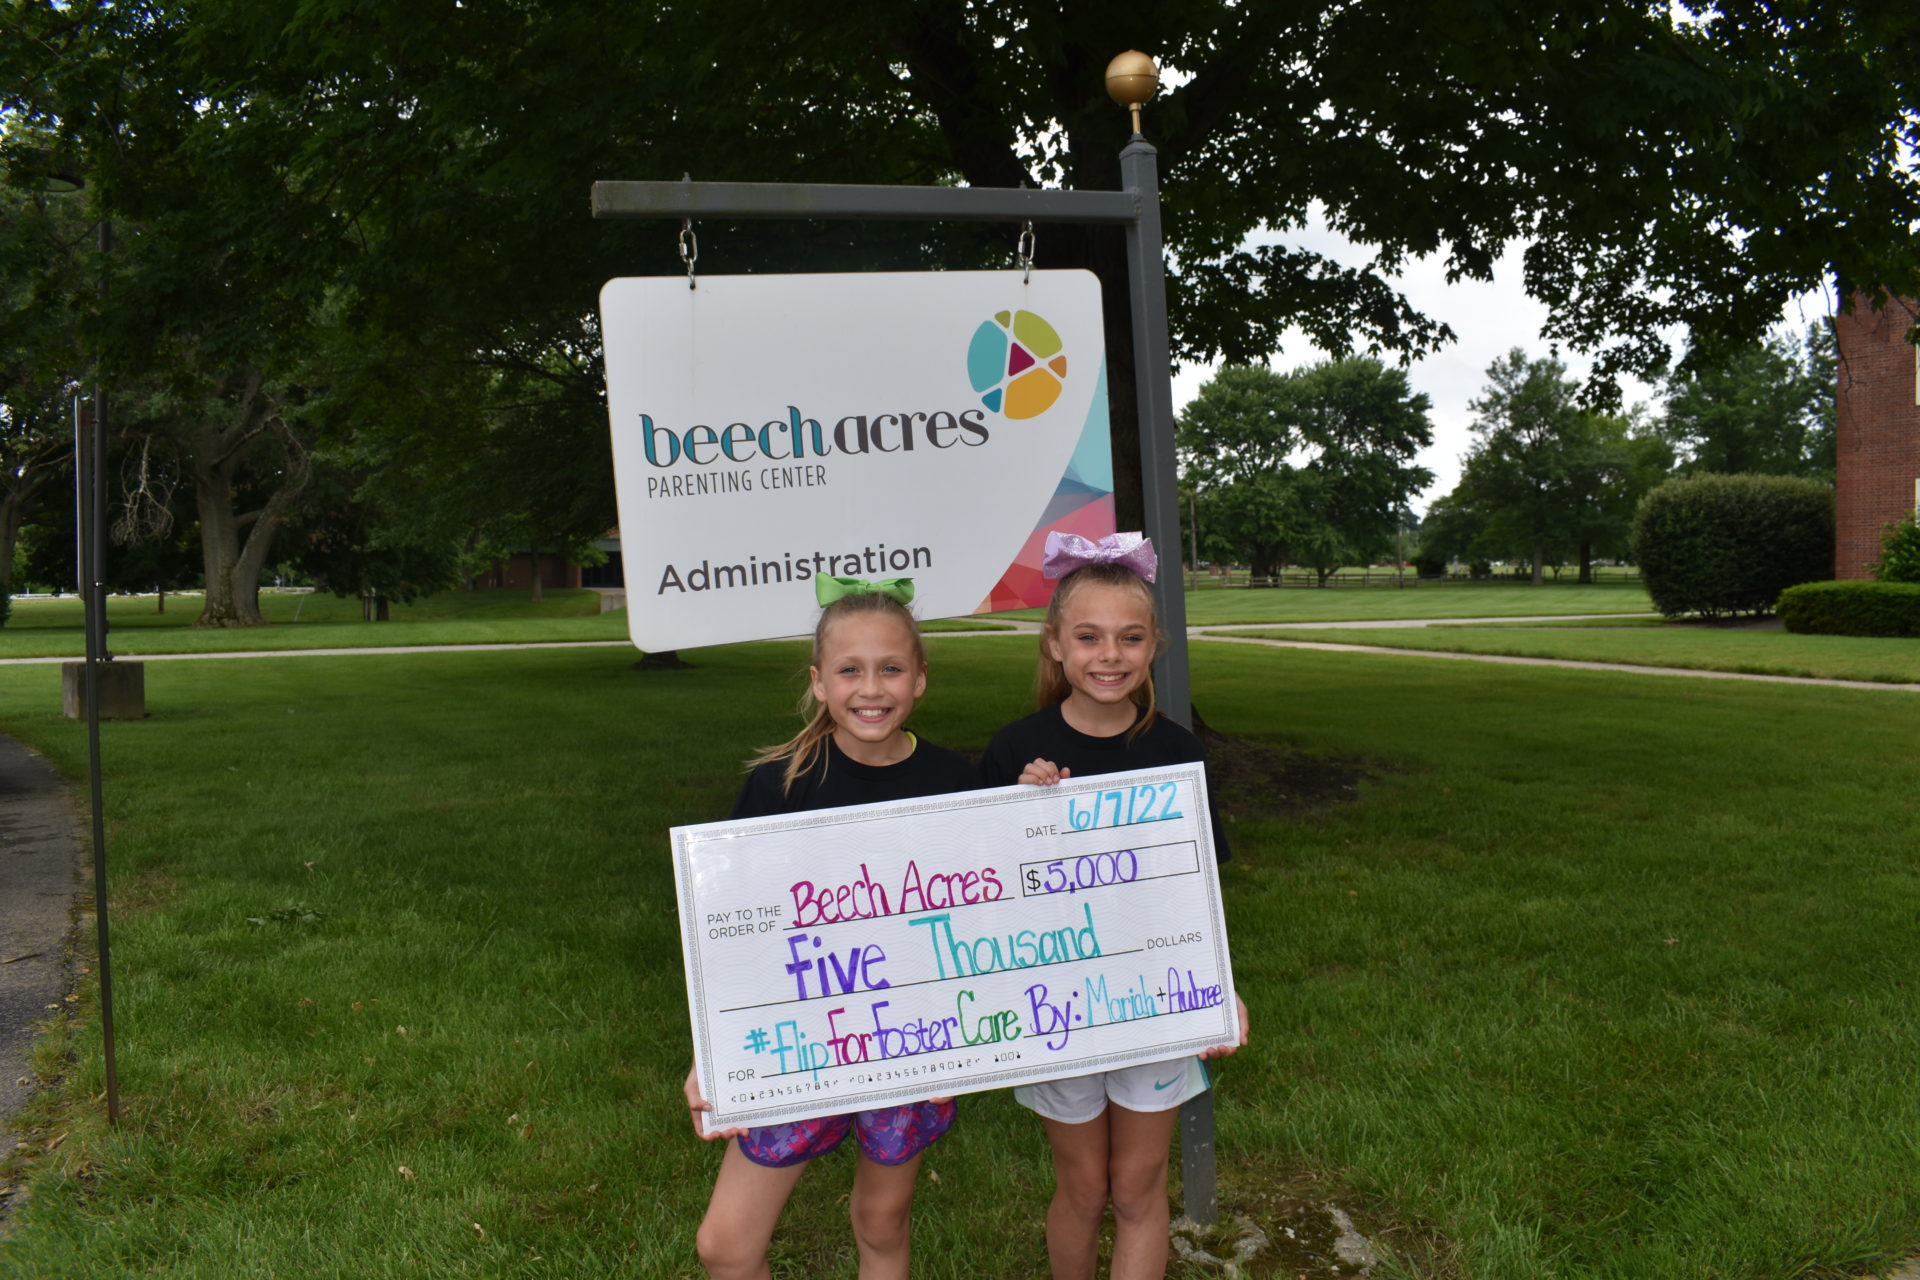 Flip For Foster Care Raises $5,000 for the Foster Care Program at Beech Acres